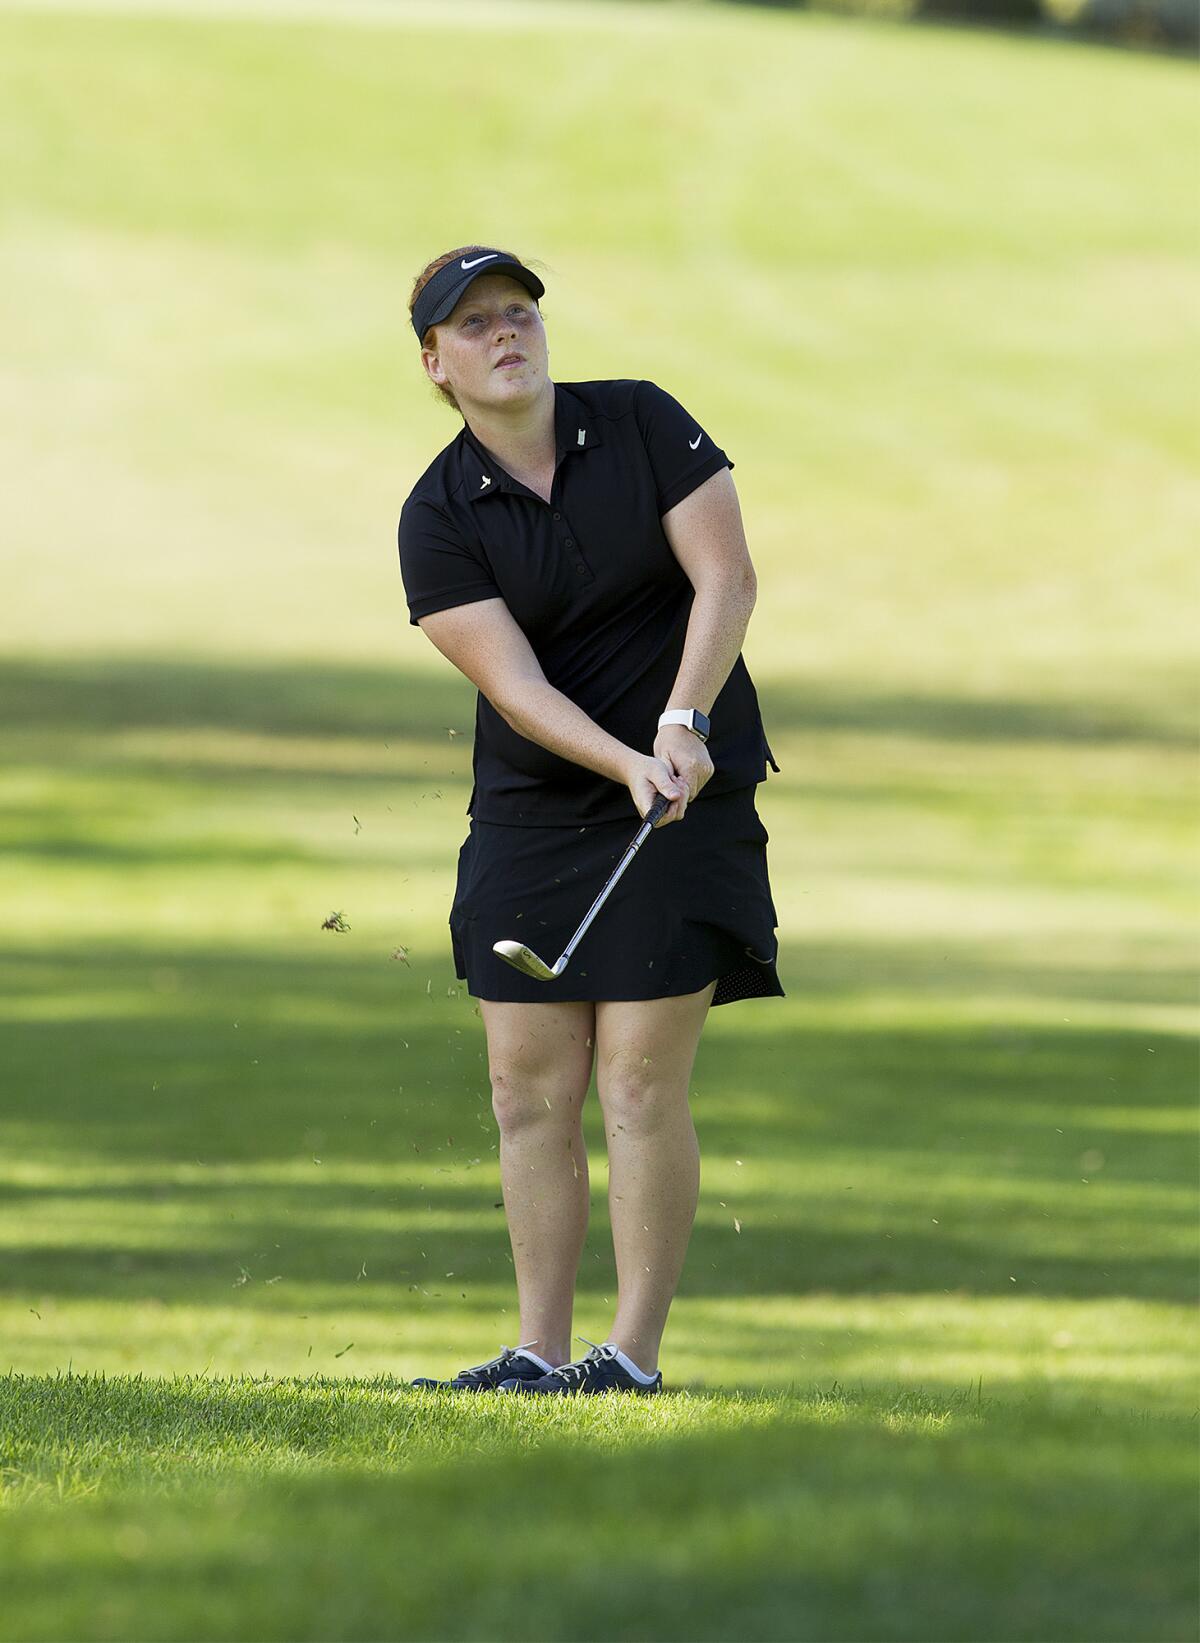 Estancia's Lexi Thorpe chips on to the green during a girls' golf match at Costa Mesa Country Club on Sept. 24, 2018.